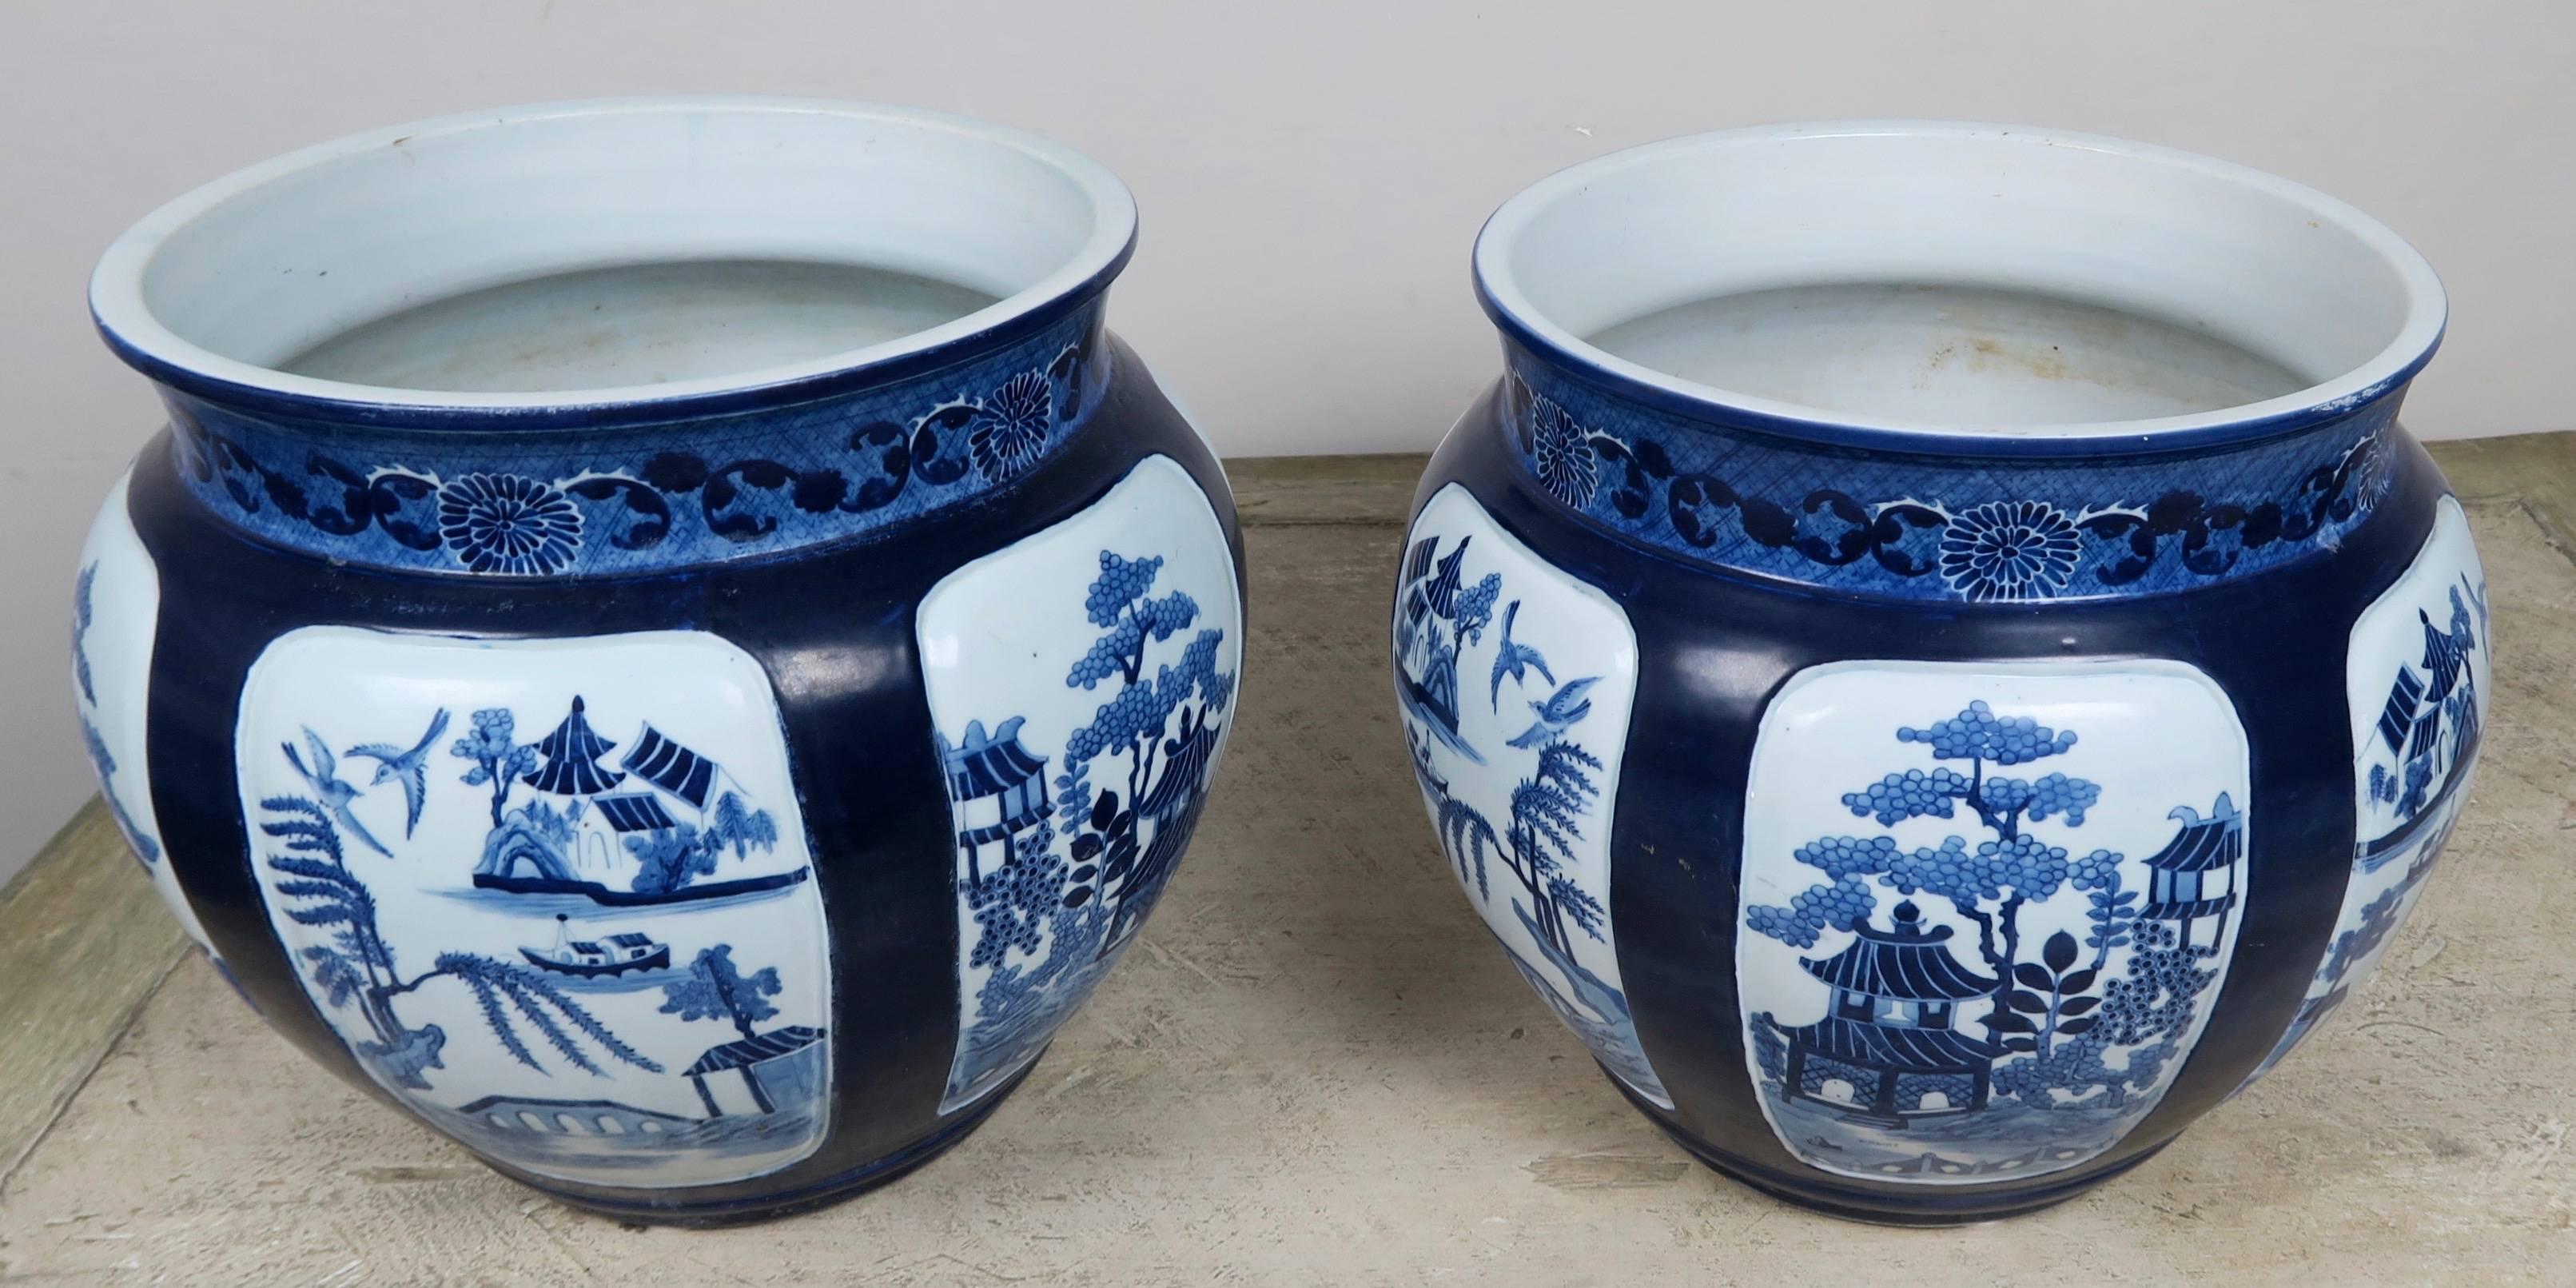 Pair of blue and white ceramic painted Chinese planters.